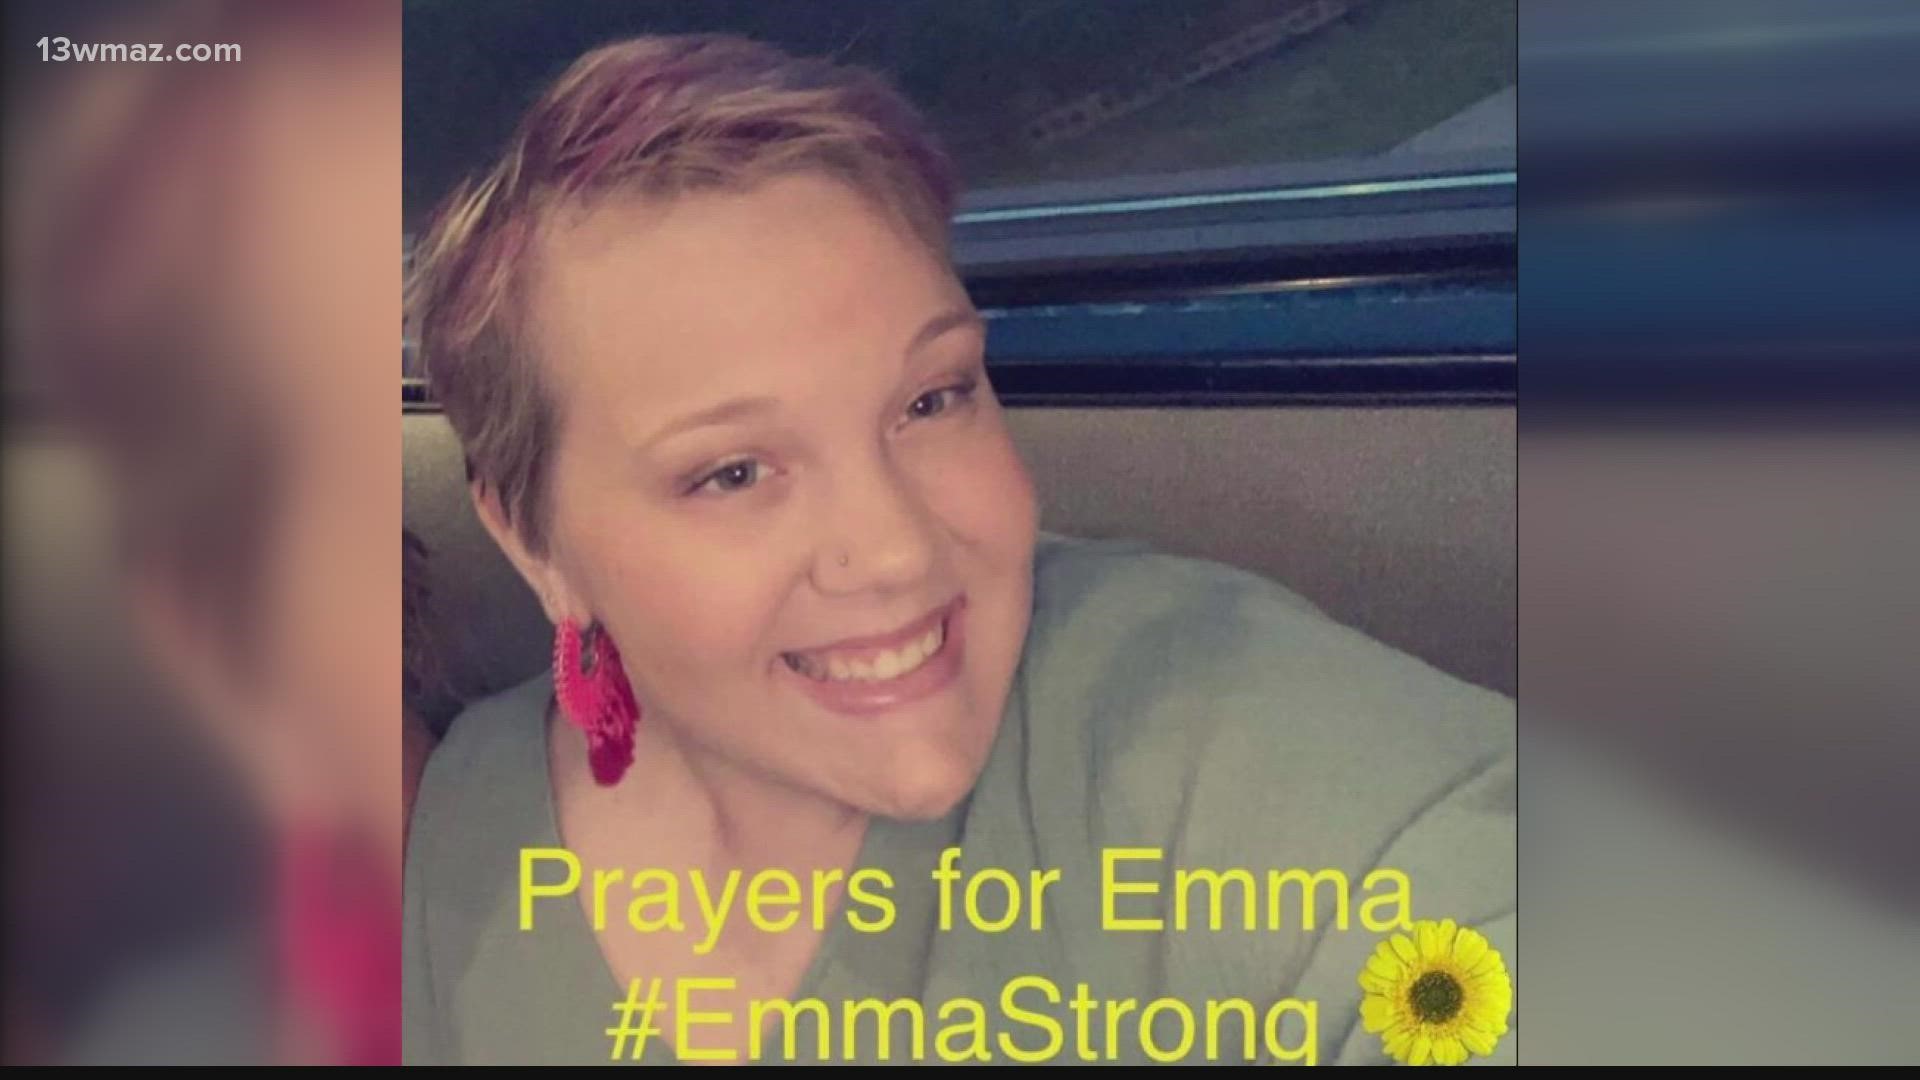 Emma Moseley was diagnosed with metastatic Ewing’s sarcoma in Feb. 2020